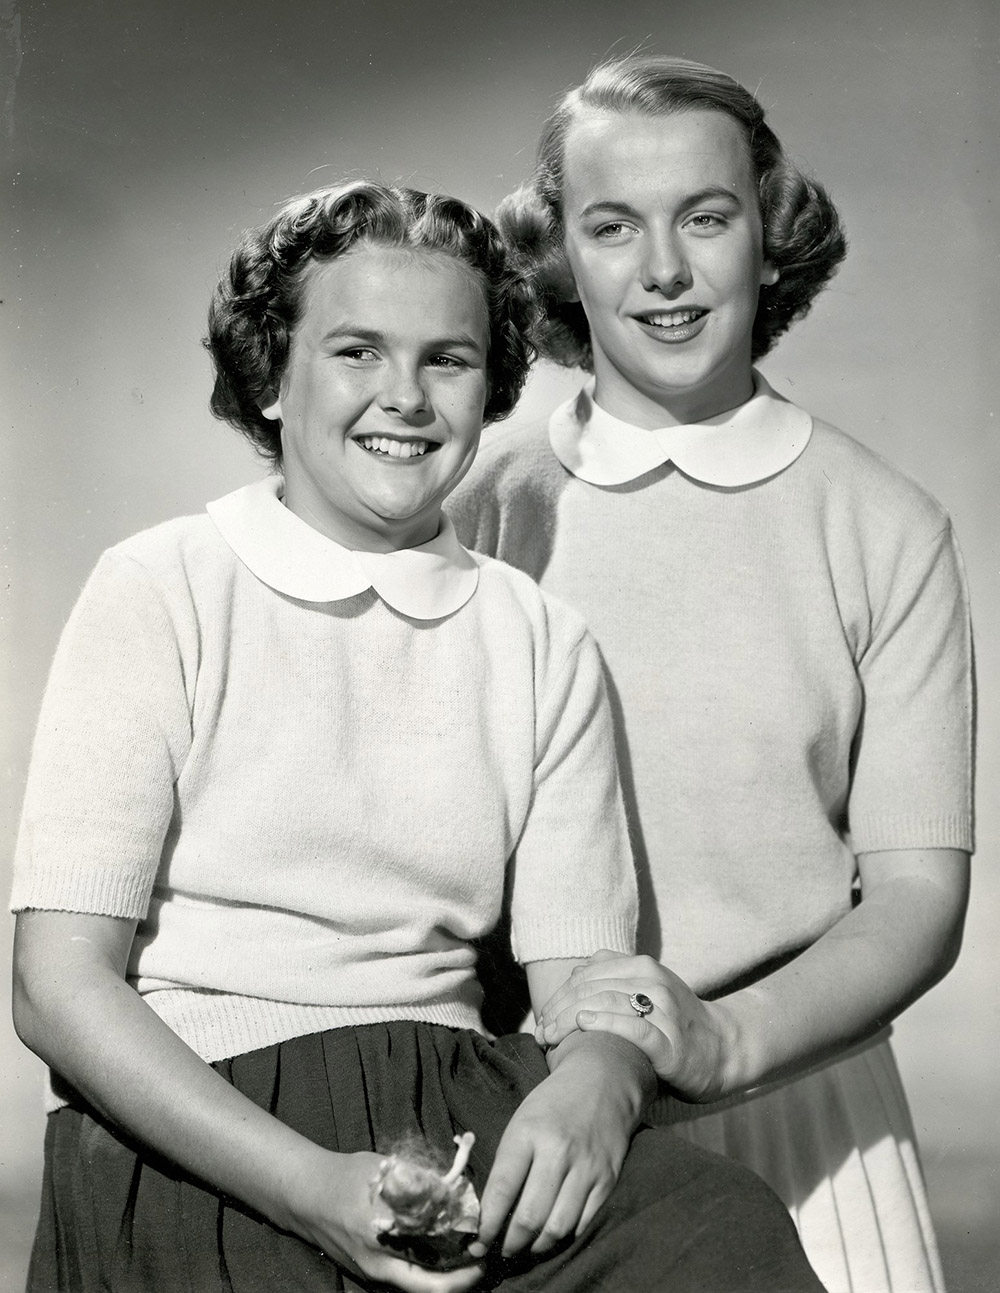 cynthia strother, one-half of the singing bell sisters, dies at 88